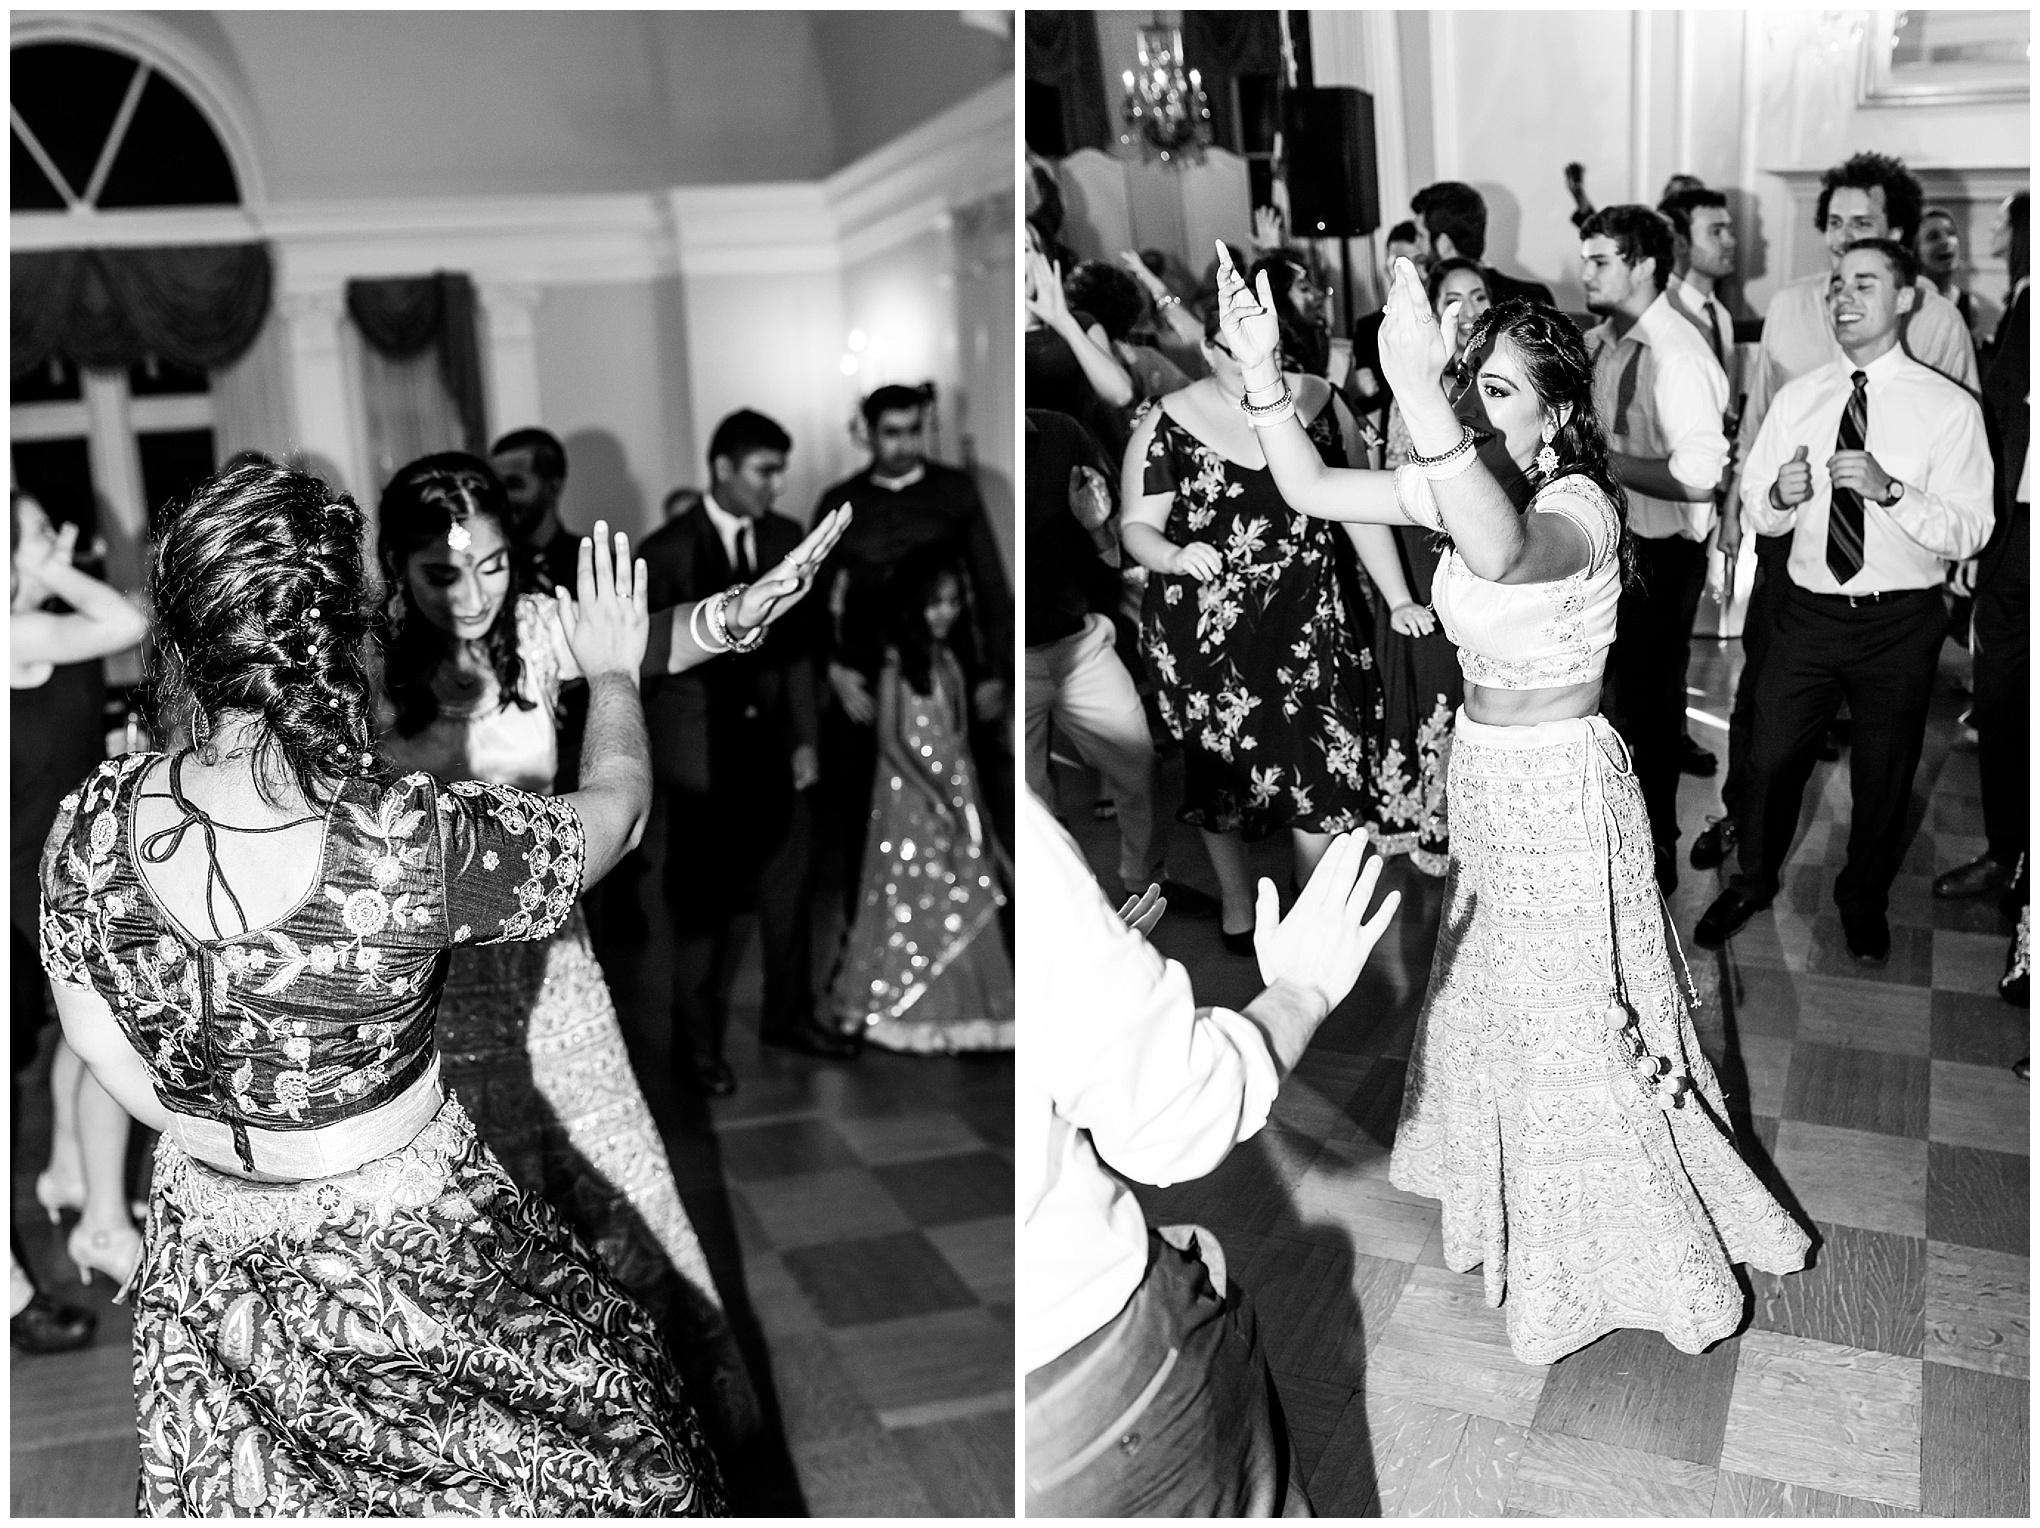 Congressional Club engagement party, engagement party, The Congressional Club, D.C., Congressional Club engagement party, Congressional Club event, event photographer, engagement party ideas, classic engagement party, Hindu engagement party, Hindu engagement ceremony, engaged couple, D.C. engagement party, Indian couple, event details, ring exchange ceremony, black and white photo, Indian dance party